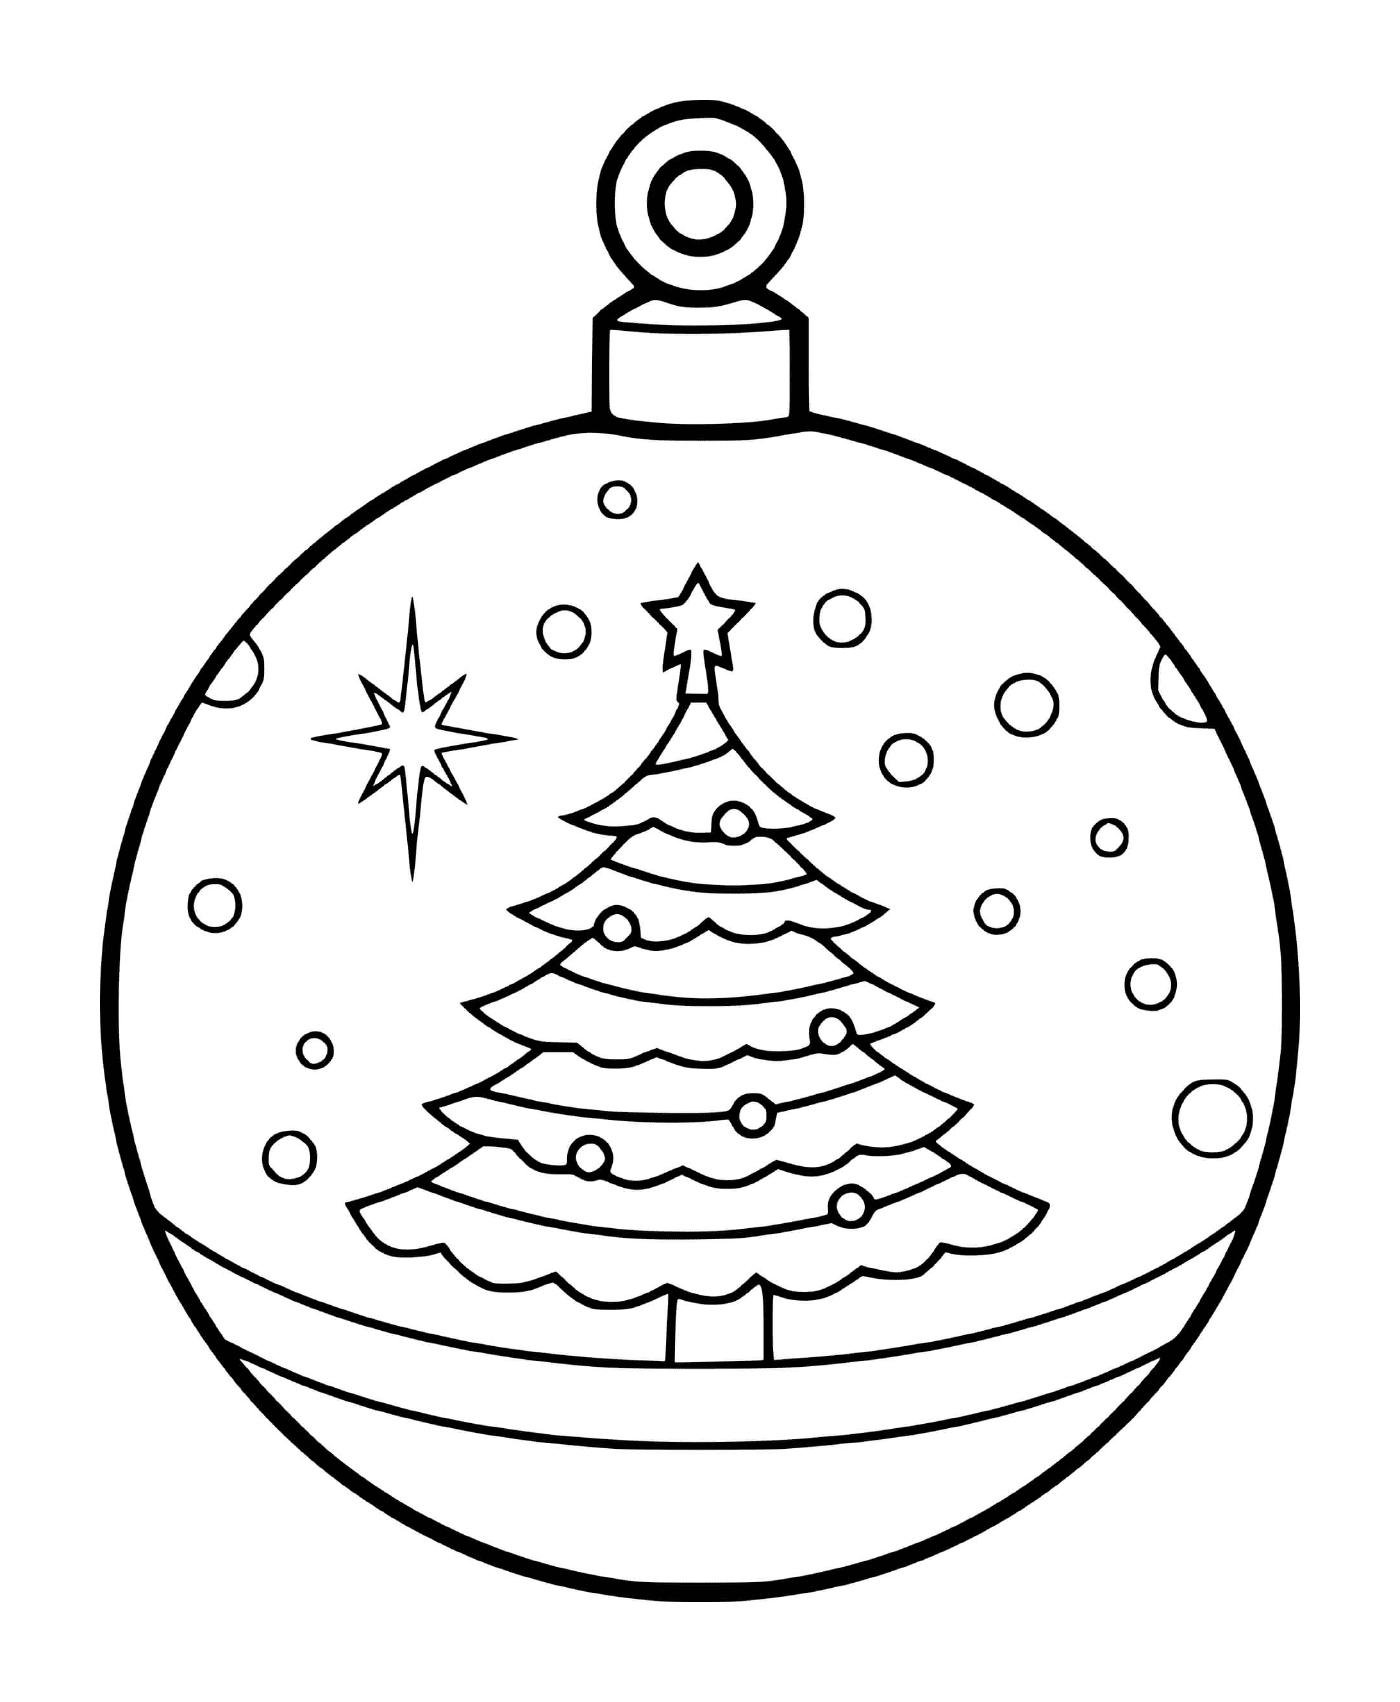  A Christmas ball with a tree landscape and winter snow 